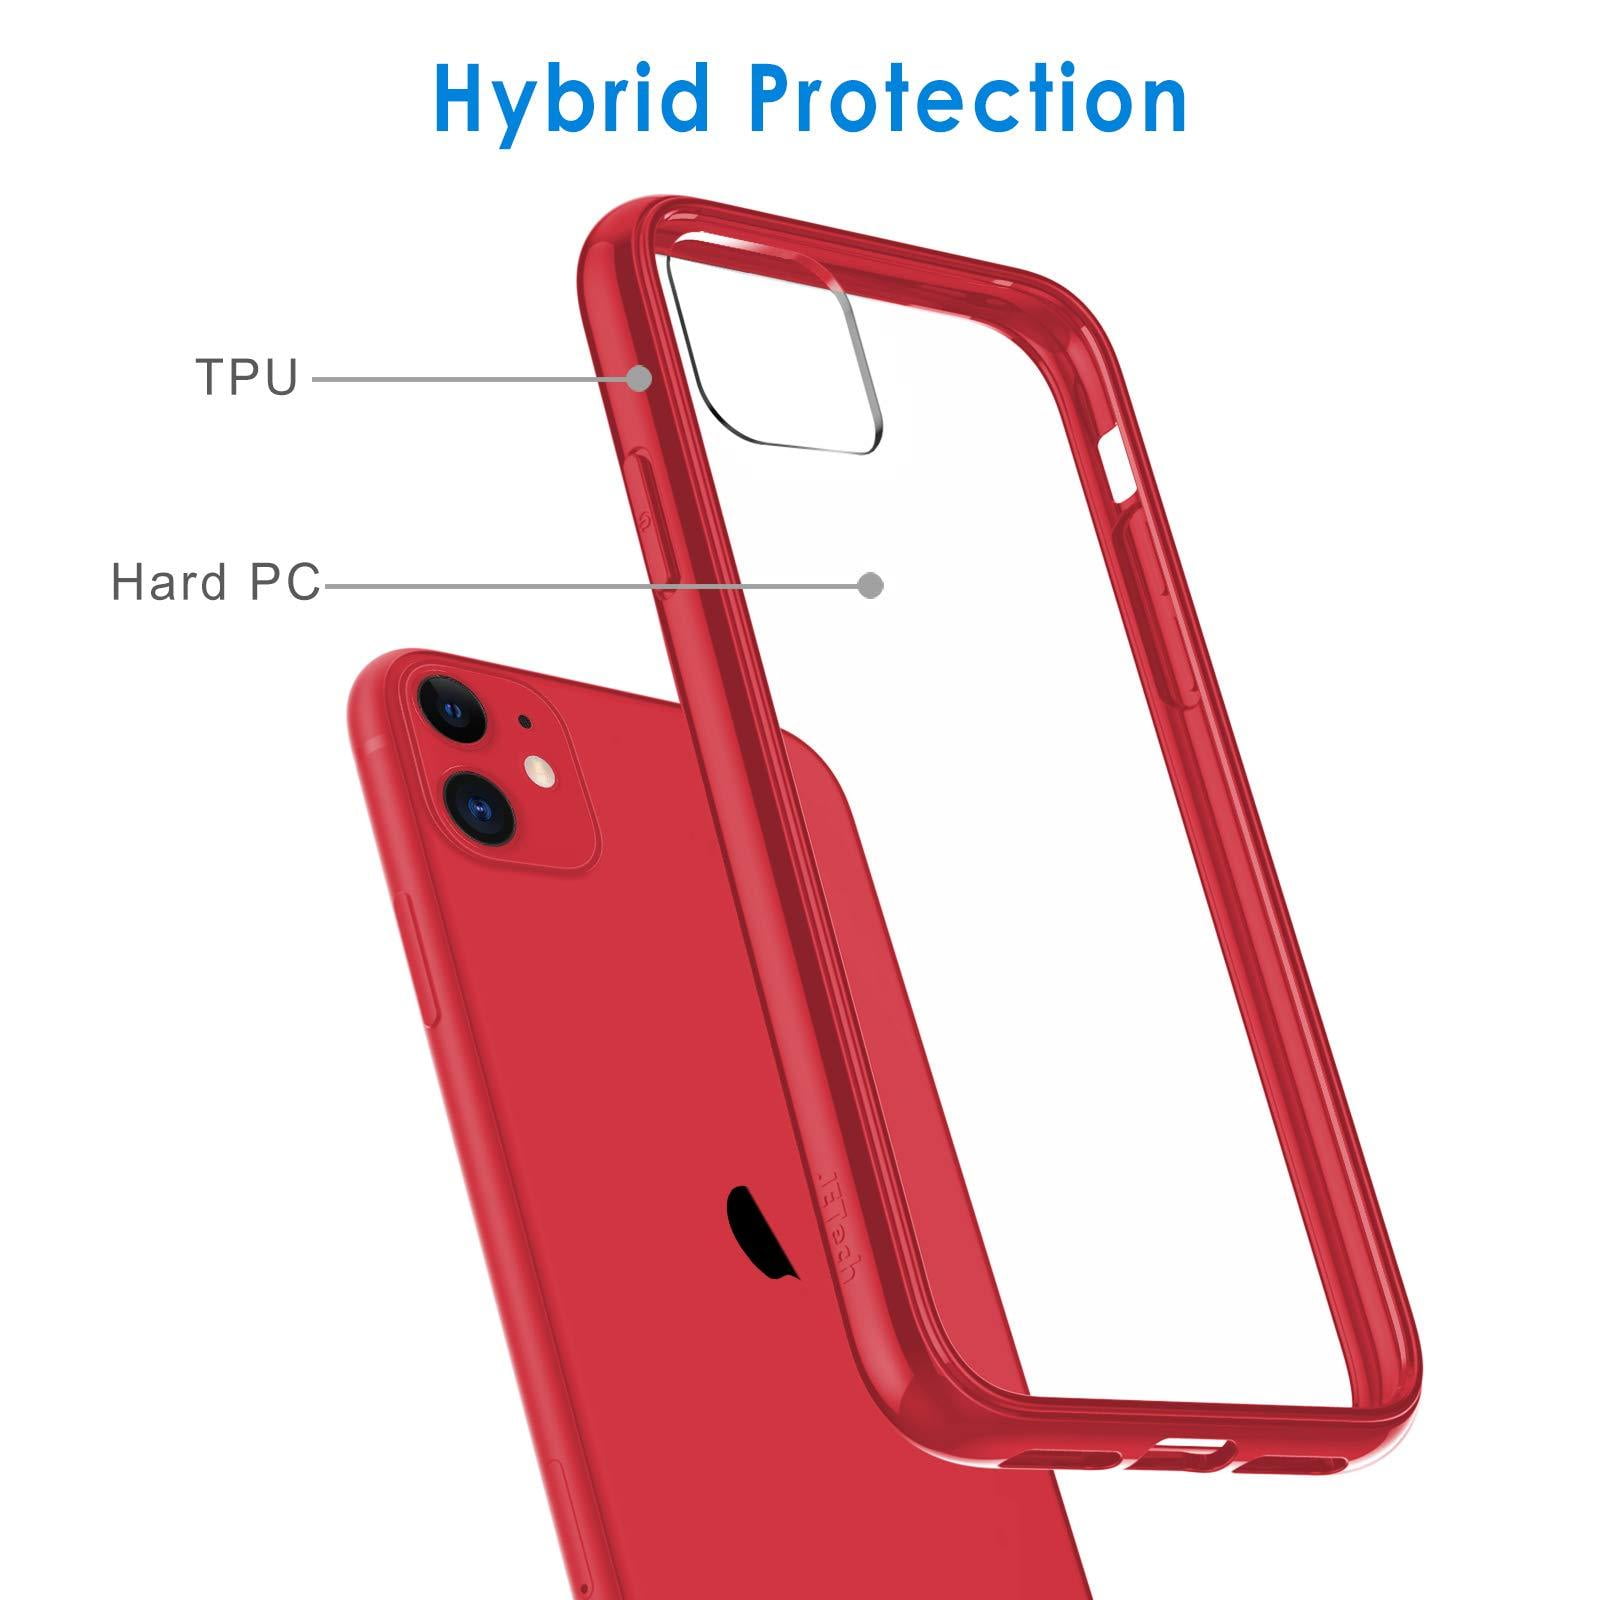 JETech Case For iPhone 11 Pro Max (2019), 6.5-Inch, Shockproof Transparent